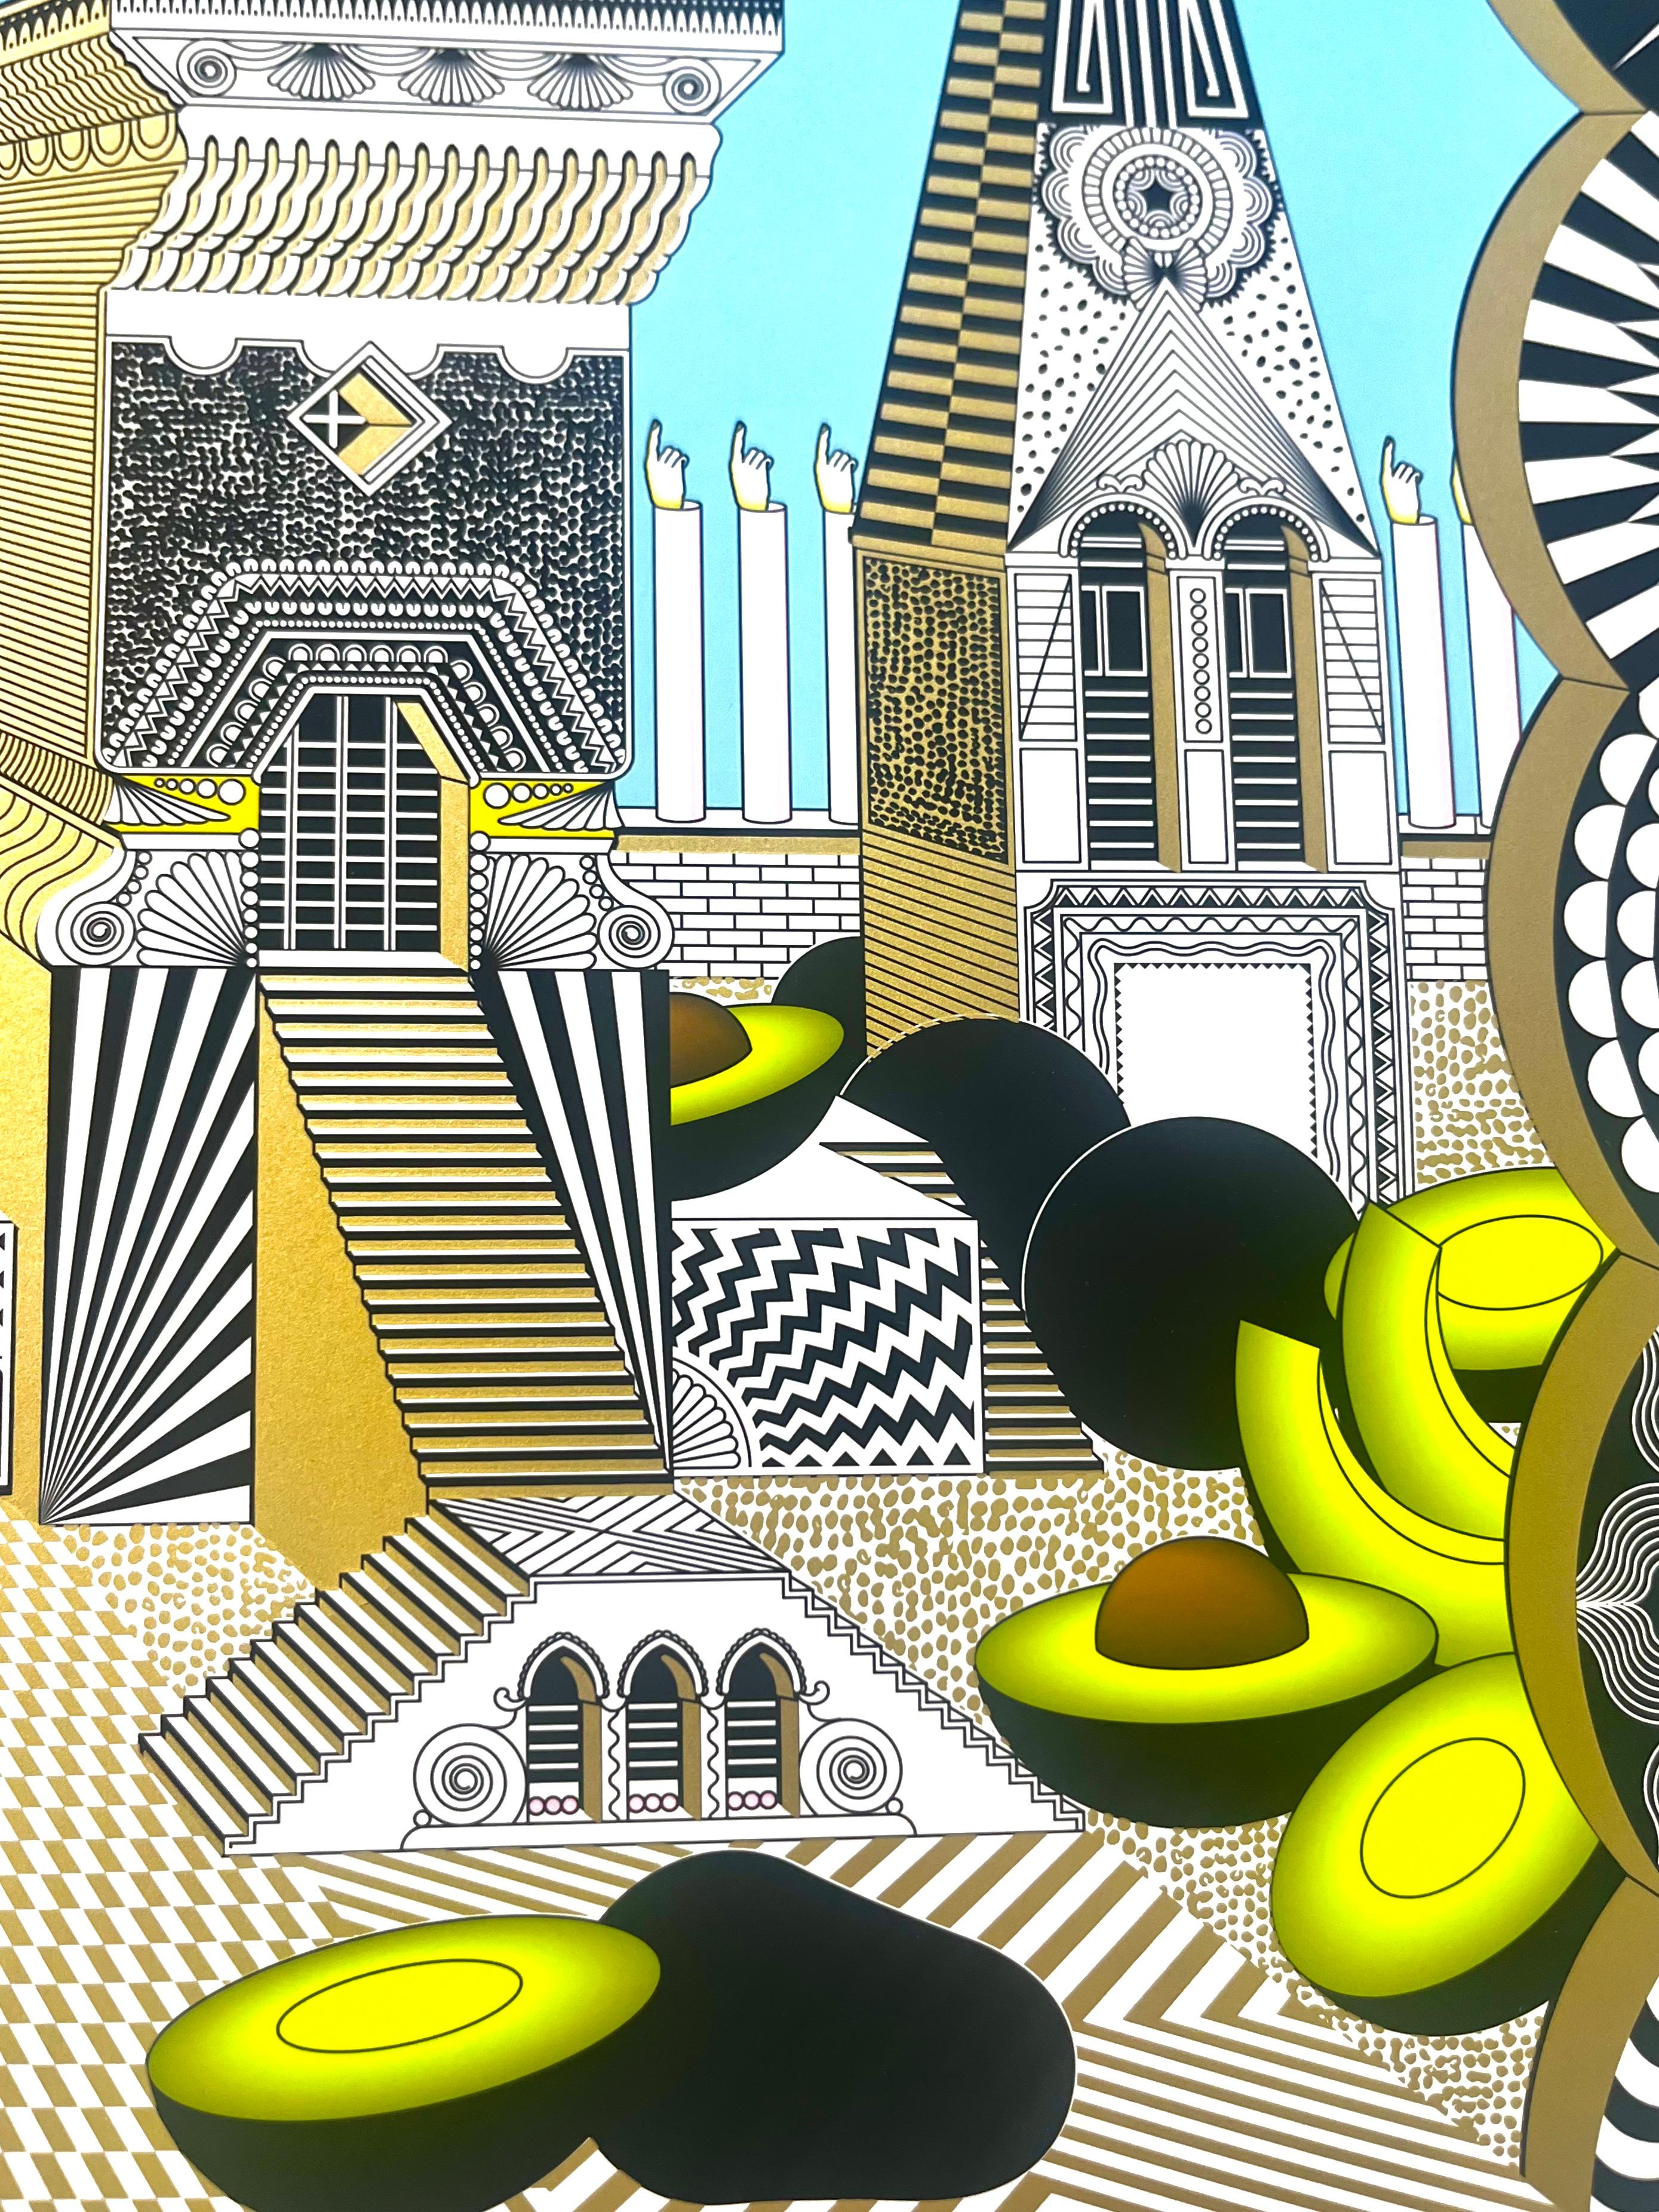 A Sunday in Avocadoland - neobarroque, geometric, surreal landscape For Sale 1